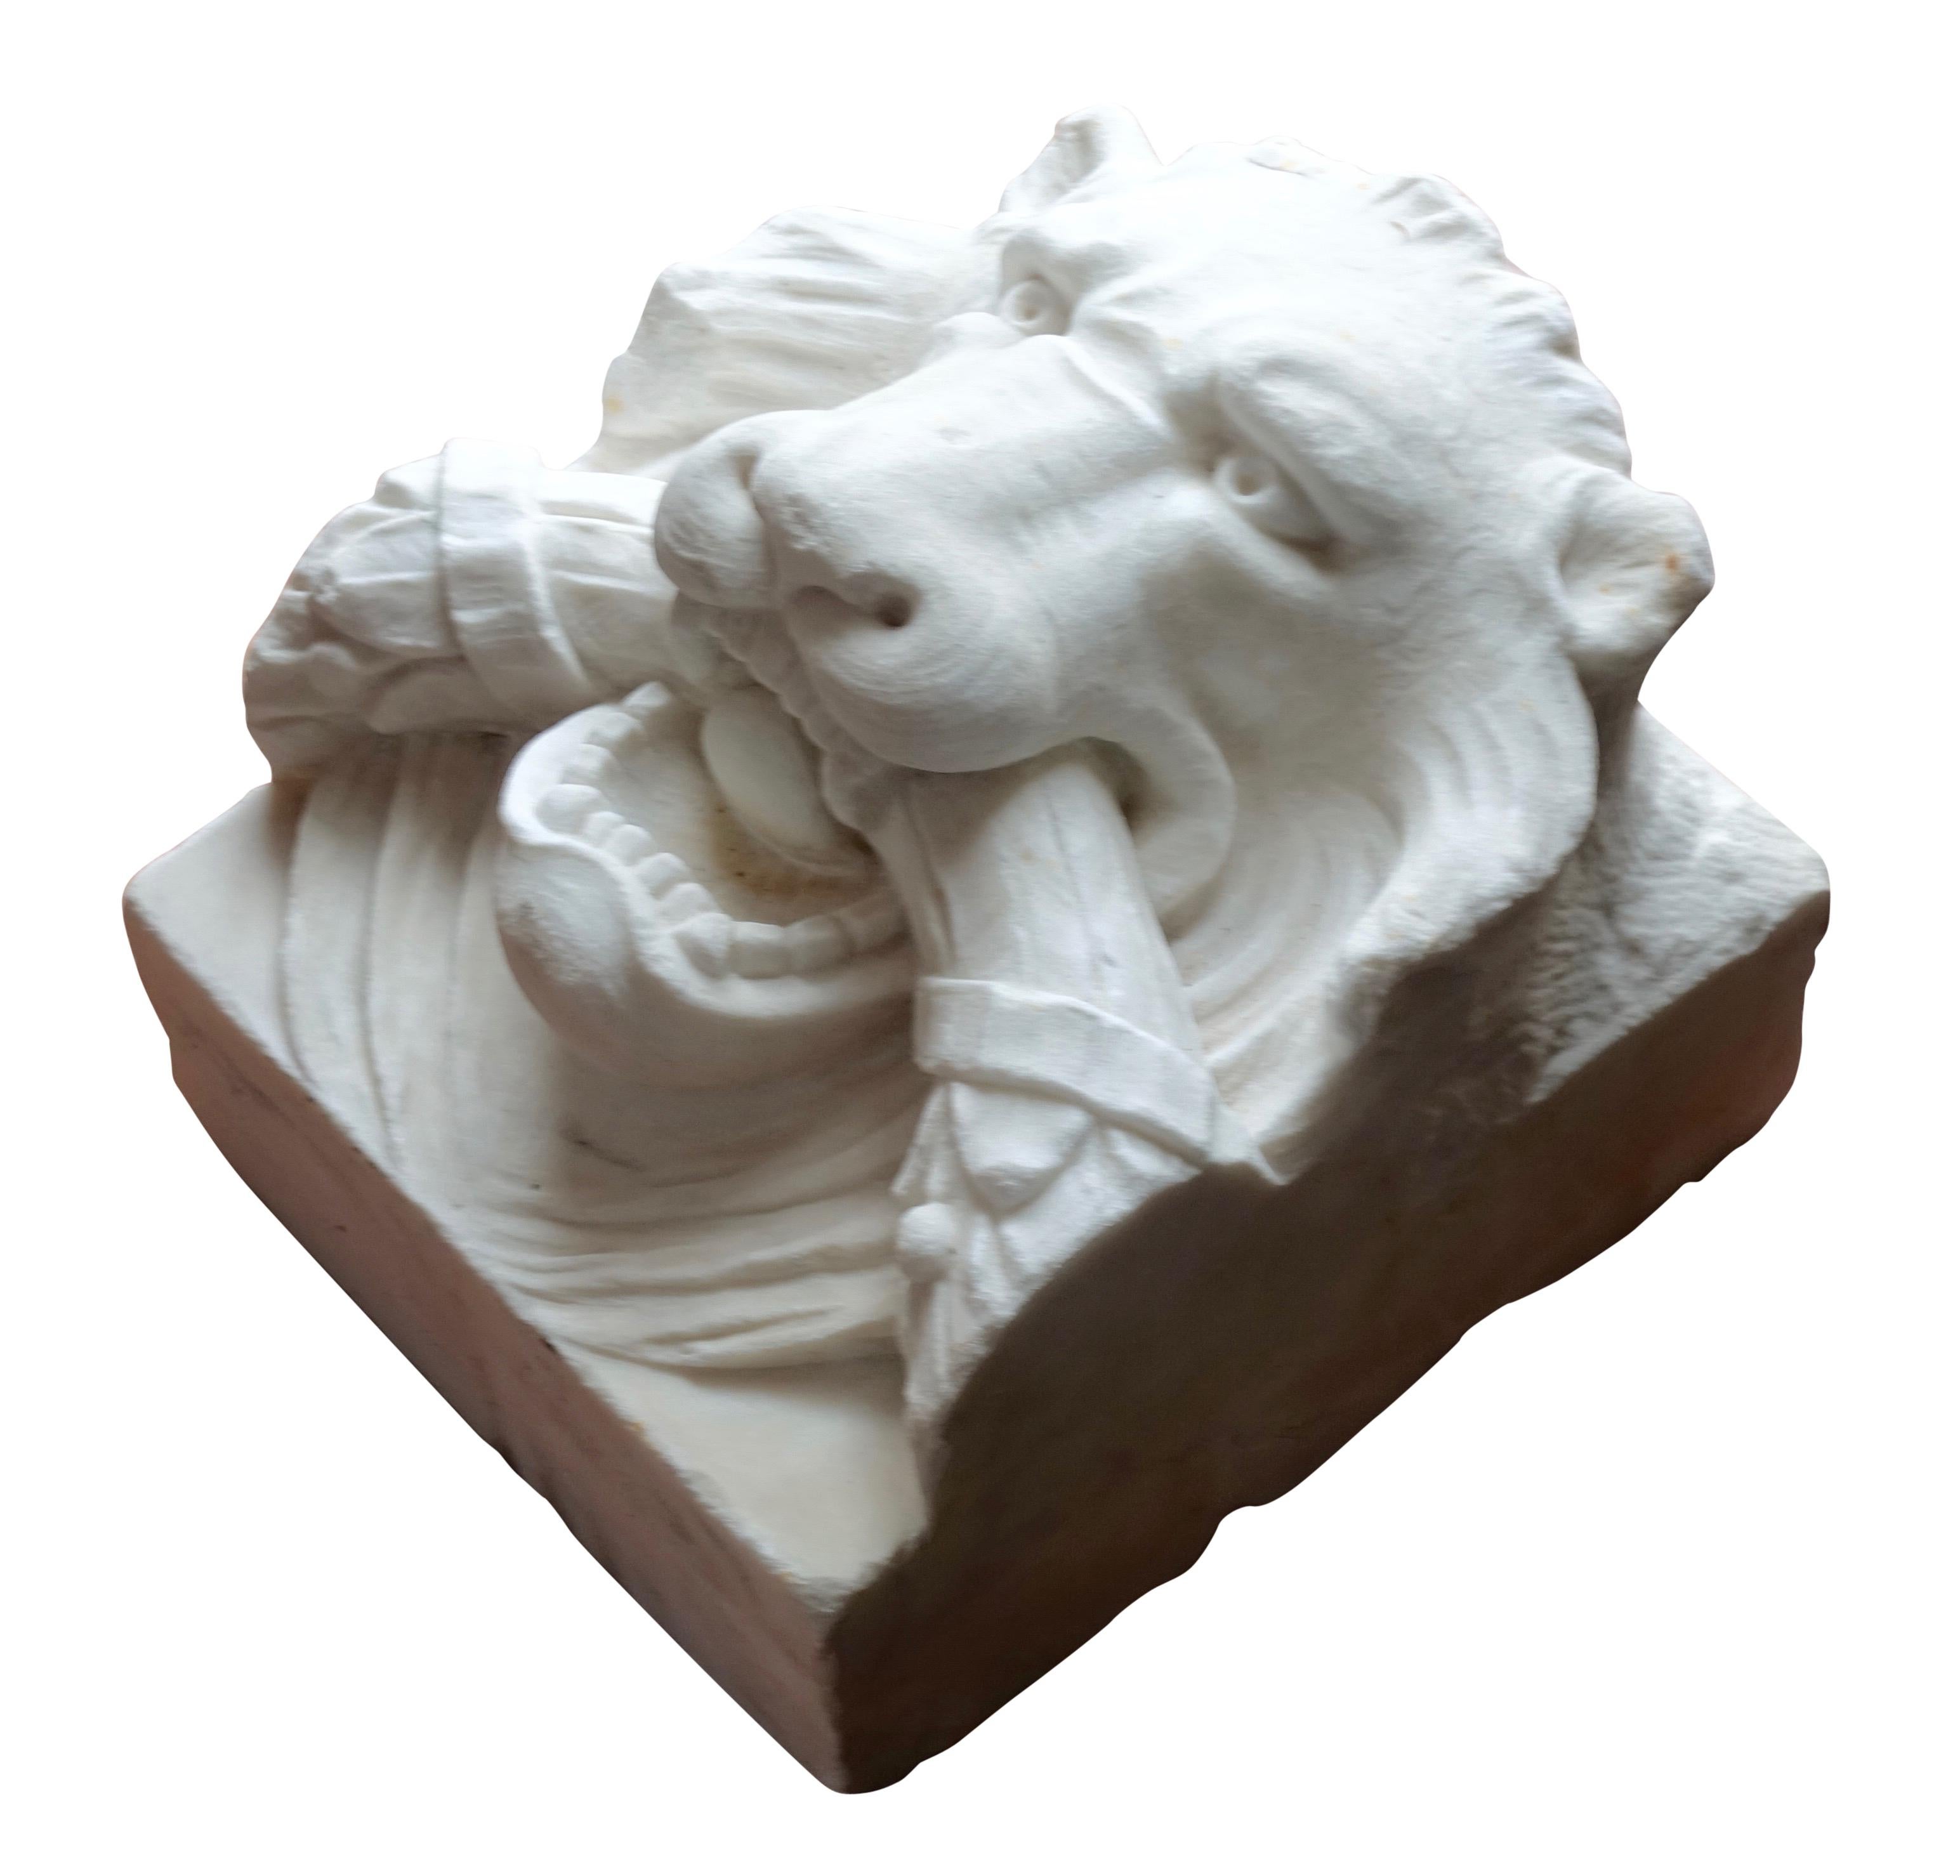 Carved 19th Century Marble Lion Architectural Element Sculpture